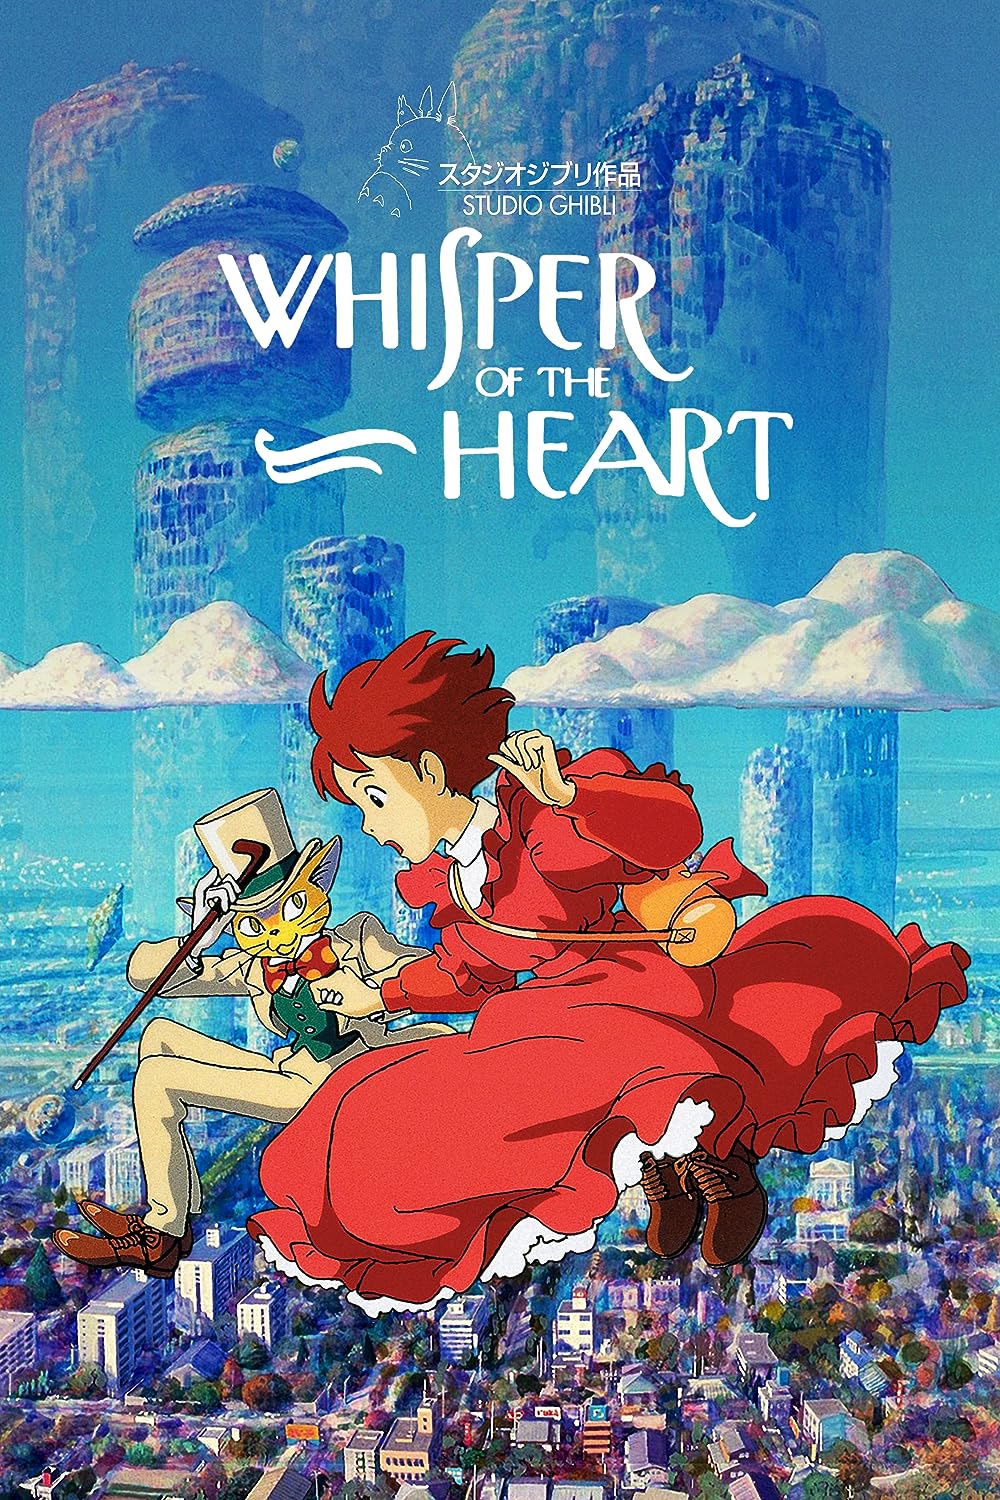 Watch Whisper of the Heart today, it's one of the best Studio Ghibli movies & romance stories. Recommended for 10+ year olds.